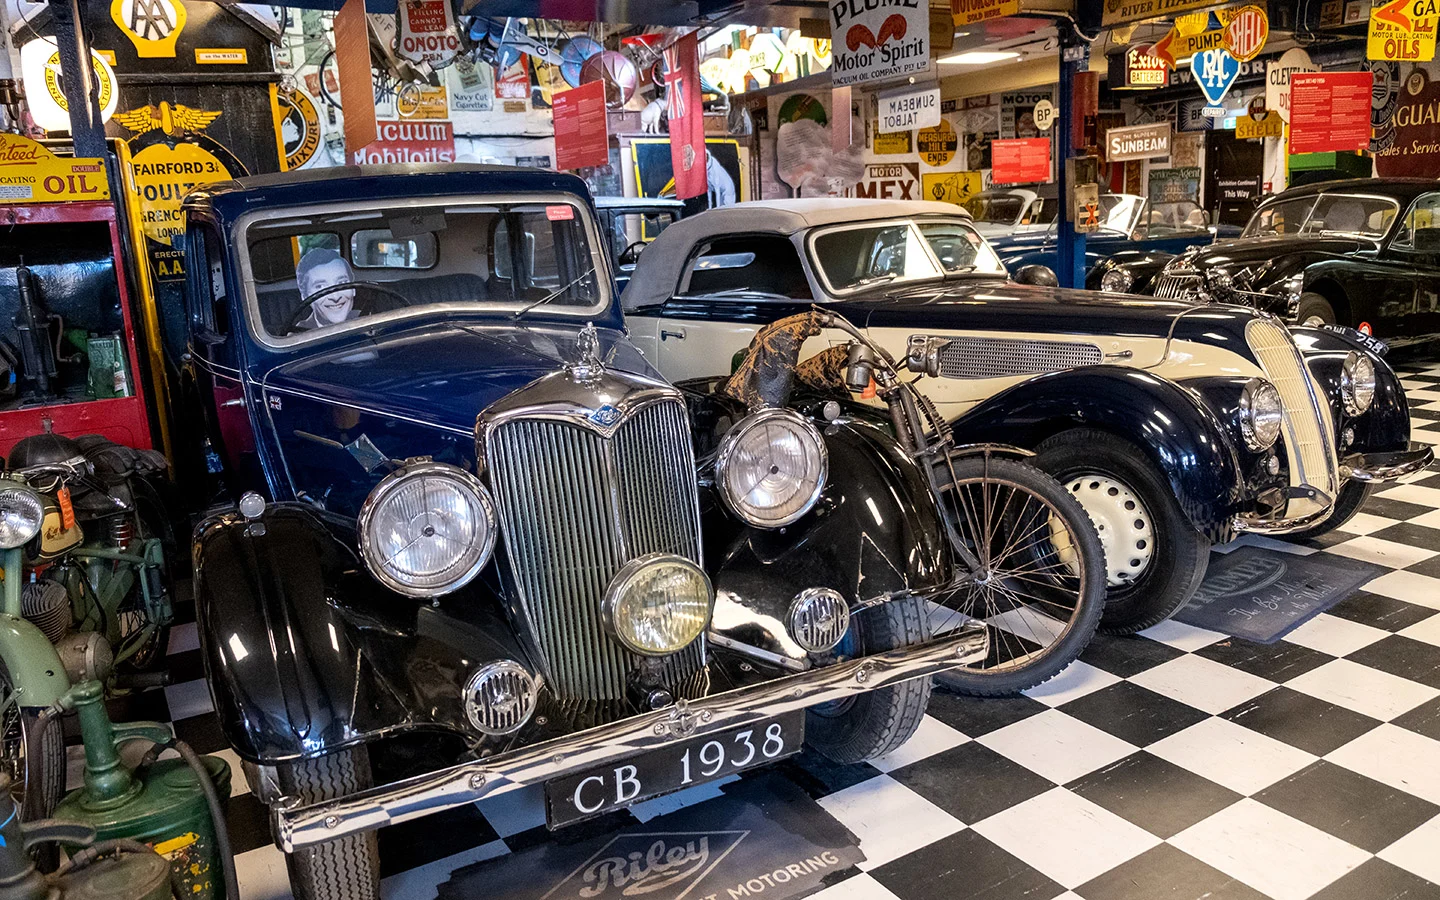 A vintage Riley in the Cotswold Motoring Museum, one of the top things to do in Bourton-on-the-Water